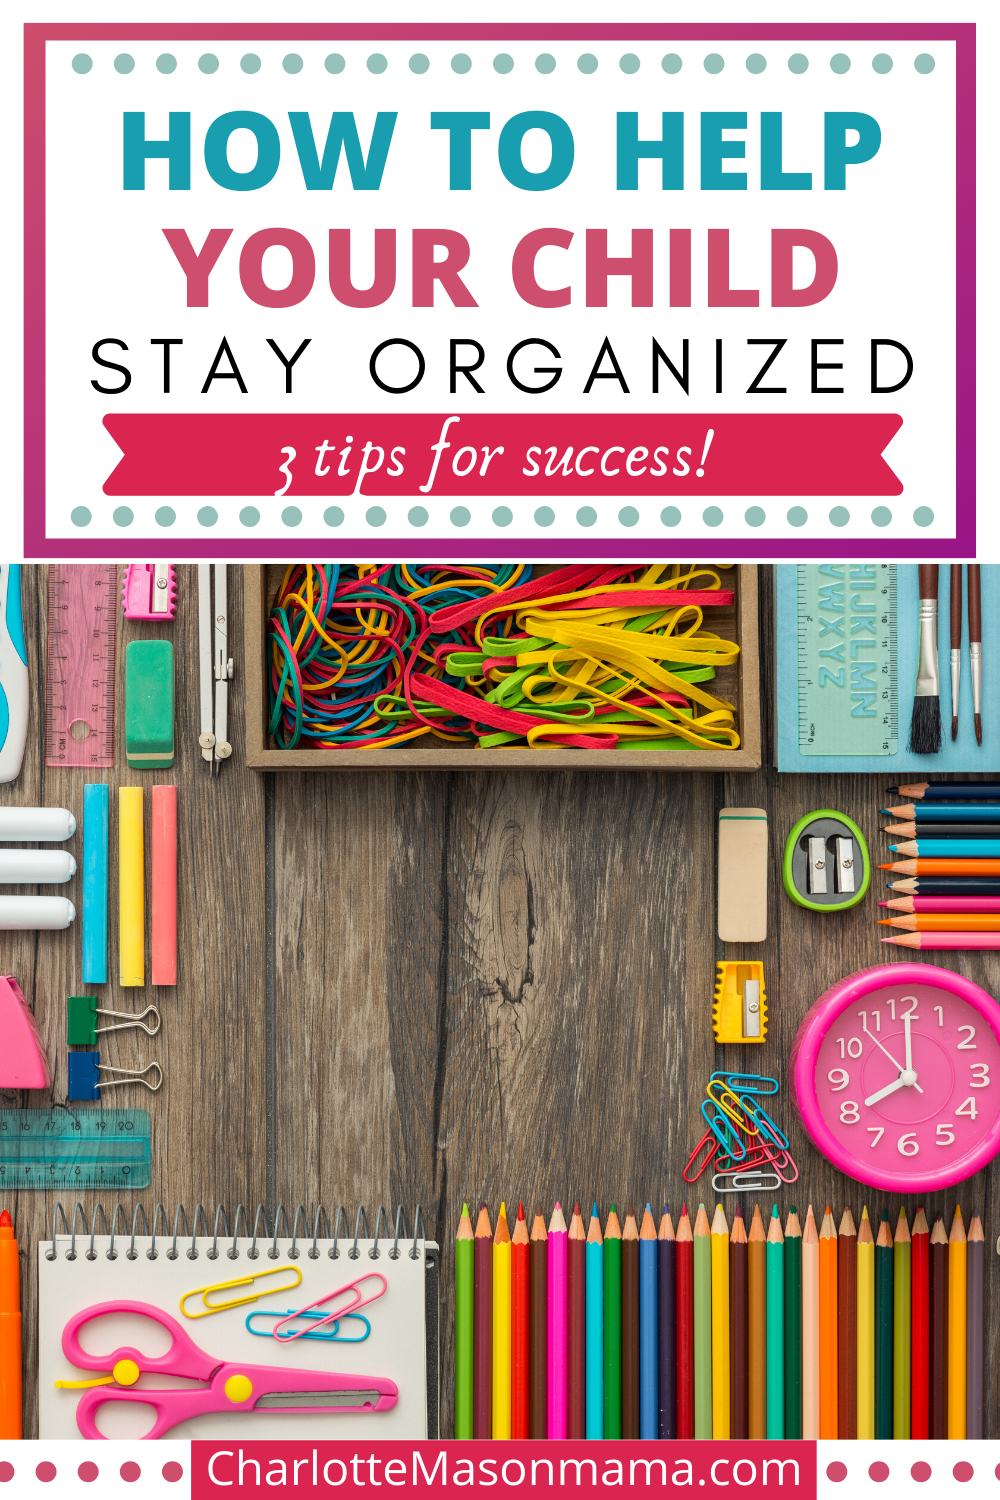 How to Help Your Child Stay Organized